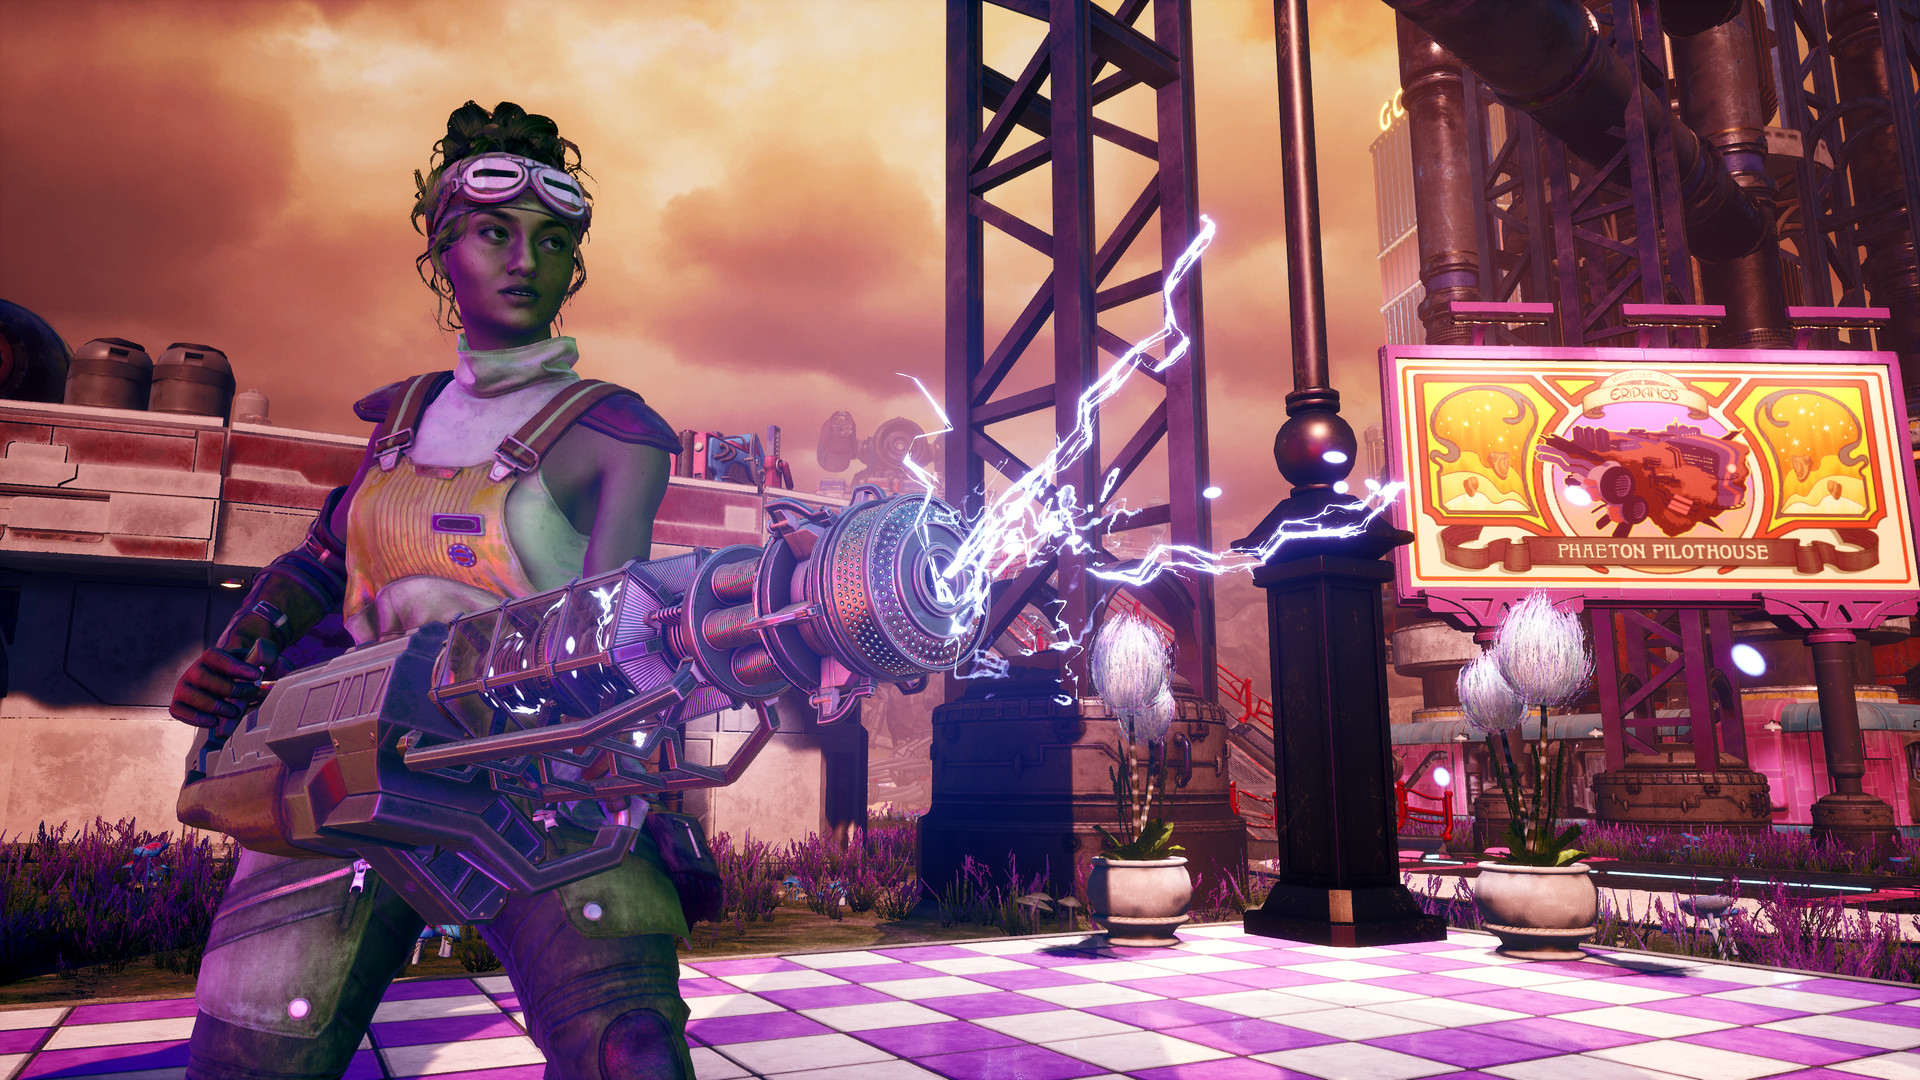 The Outer Worlds: Murder on Eridanos Review - mxdwn Games